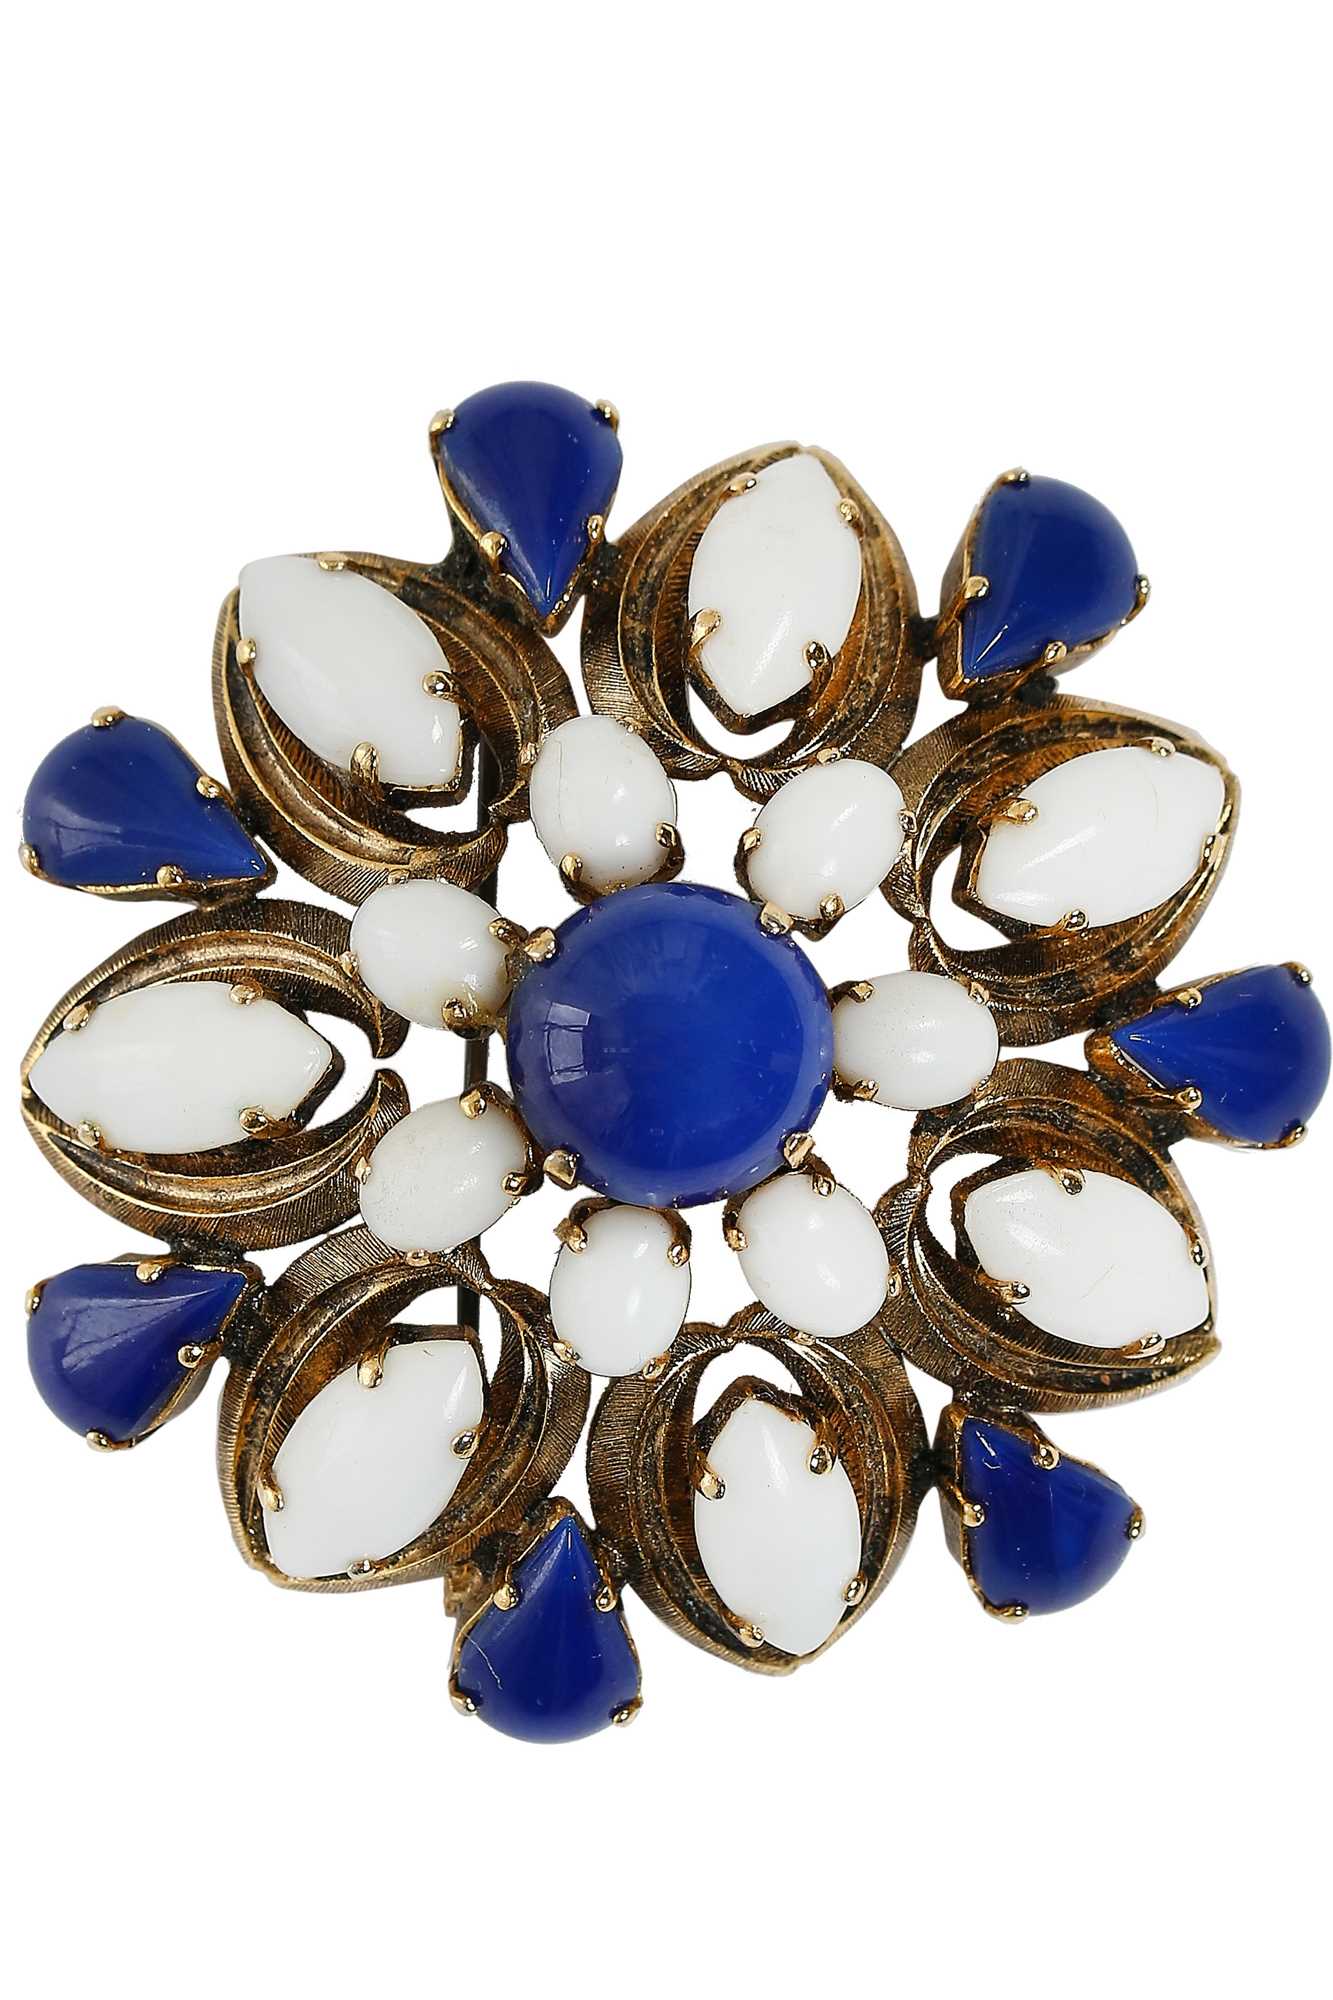 Lot 27 - A Dior demi-parure of polished blue and white 'stones' inset into gilt frames, 1964